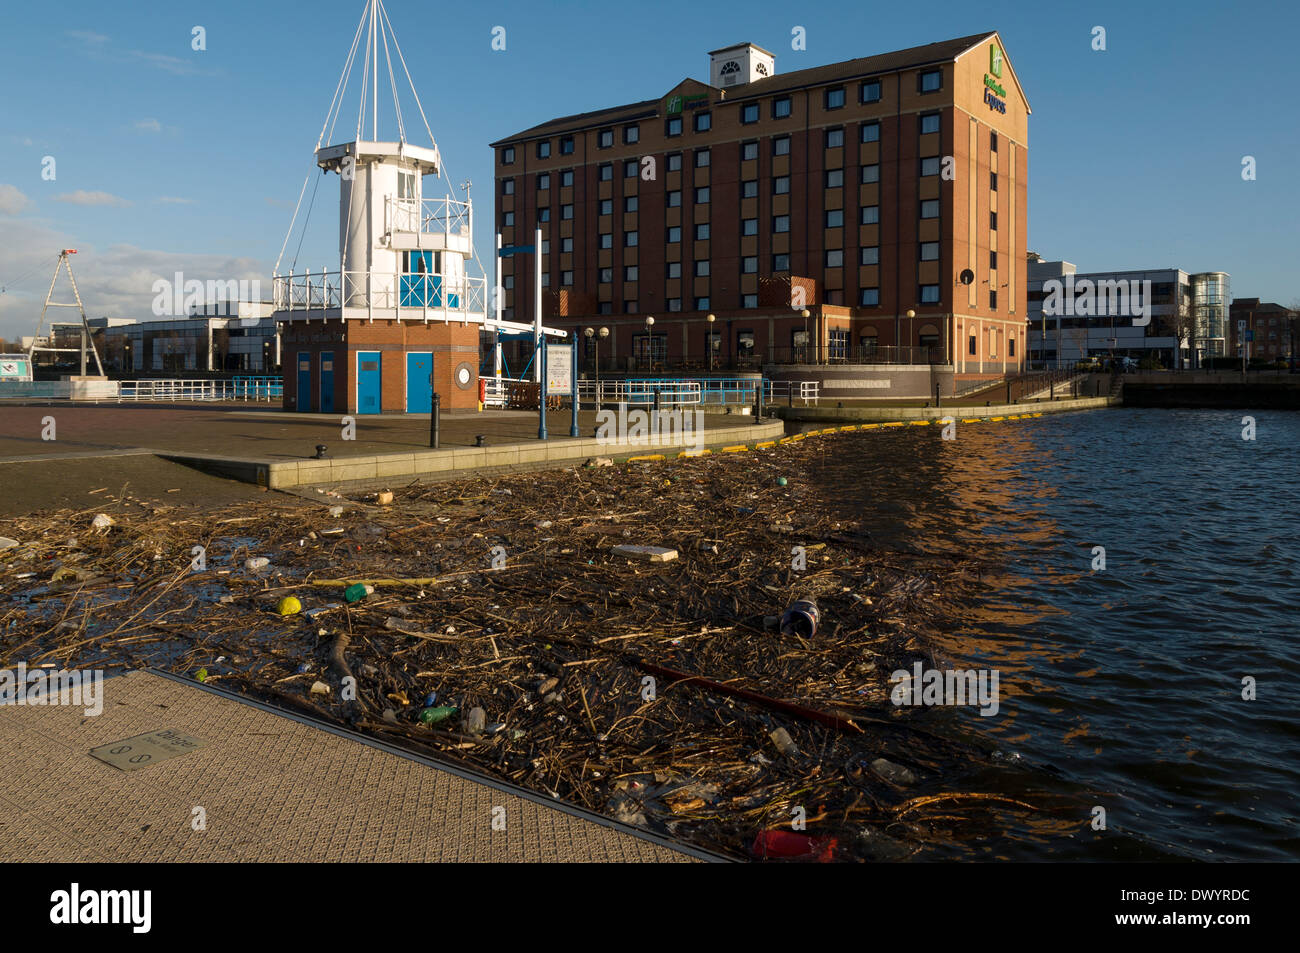 Holiday Inn Express at Welland Lock, Salford Quays, Manchester, England, UK.  With a lot of floating debris in the foreground. Stock Photo